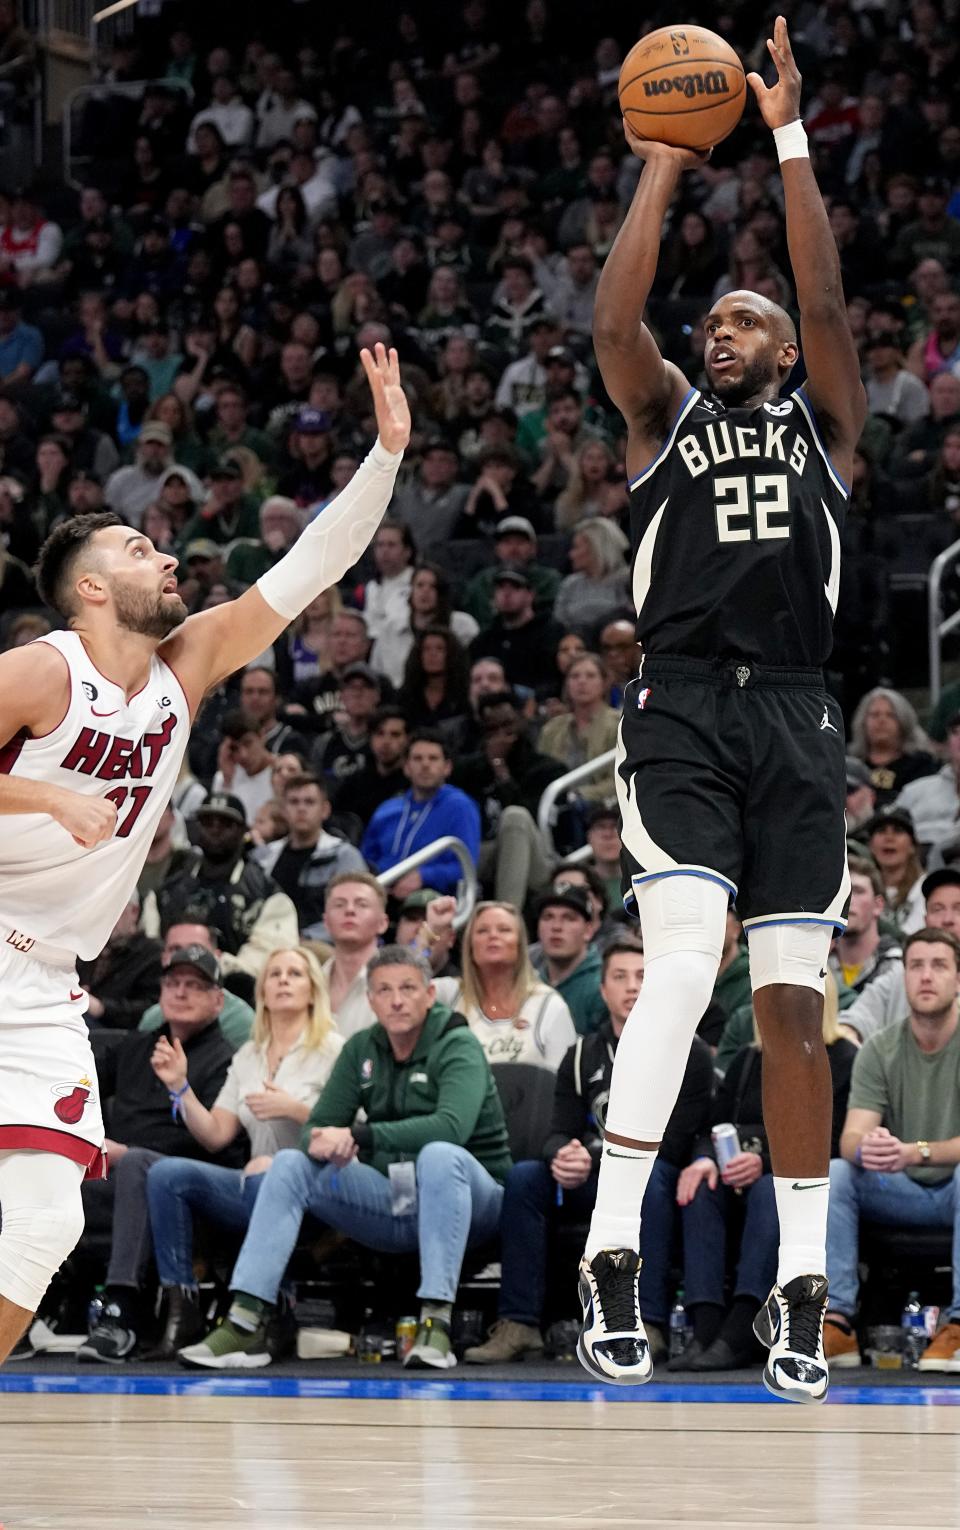 Khris Middleton had a procedure on his right knee shortly after the Milwaukee Bucks’ season ended.